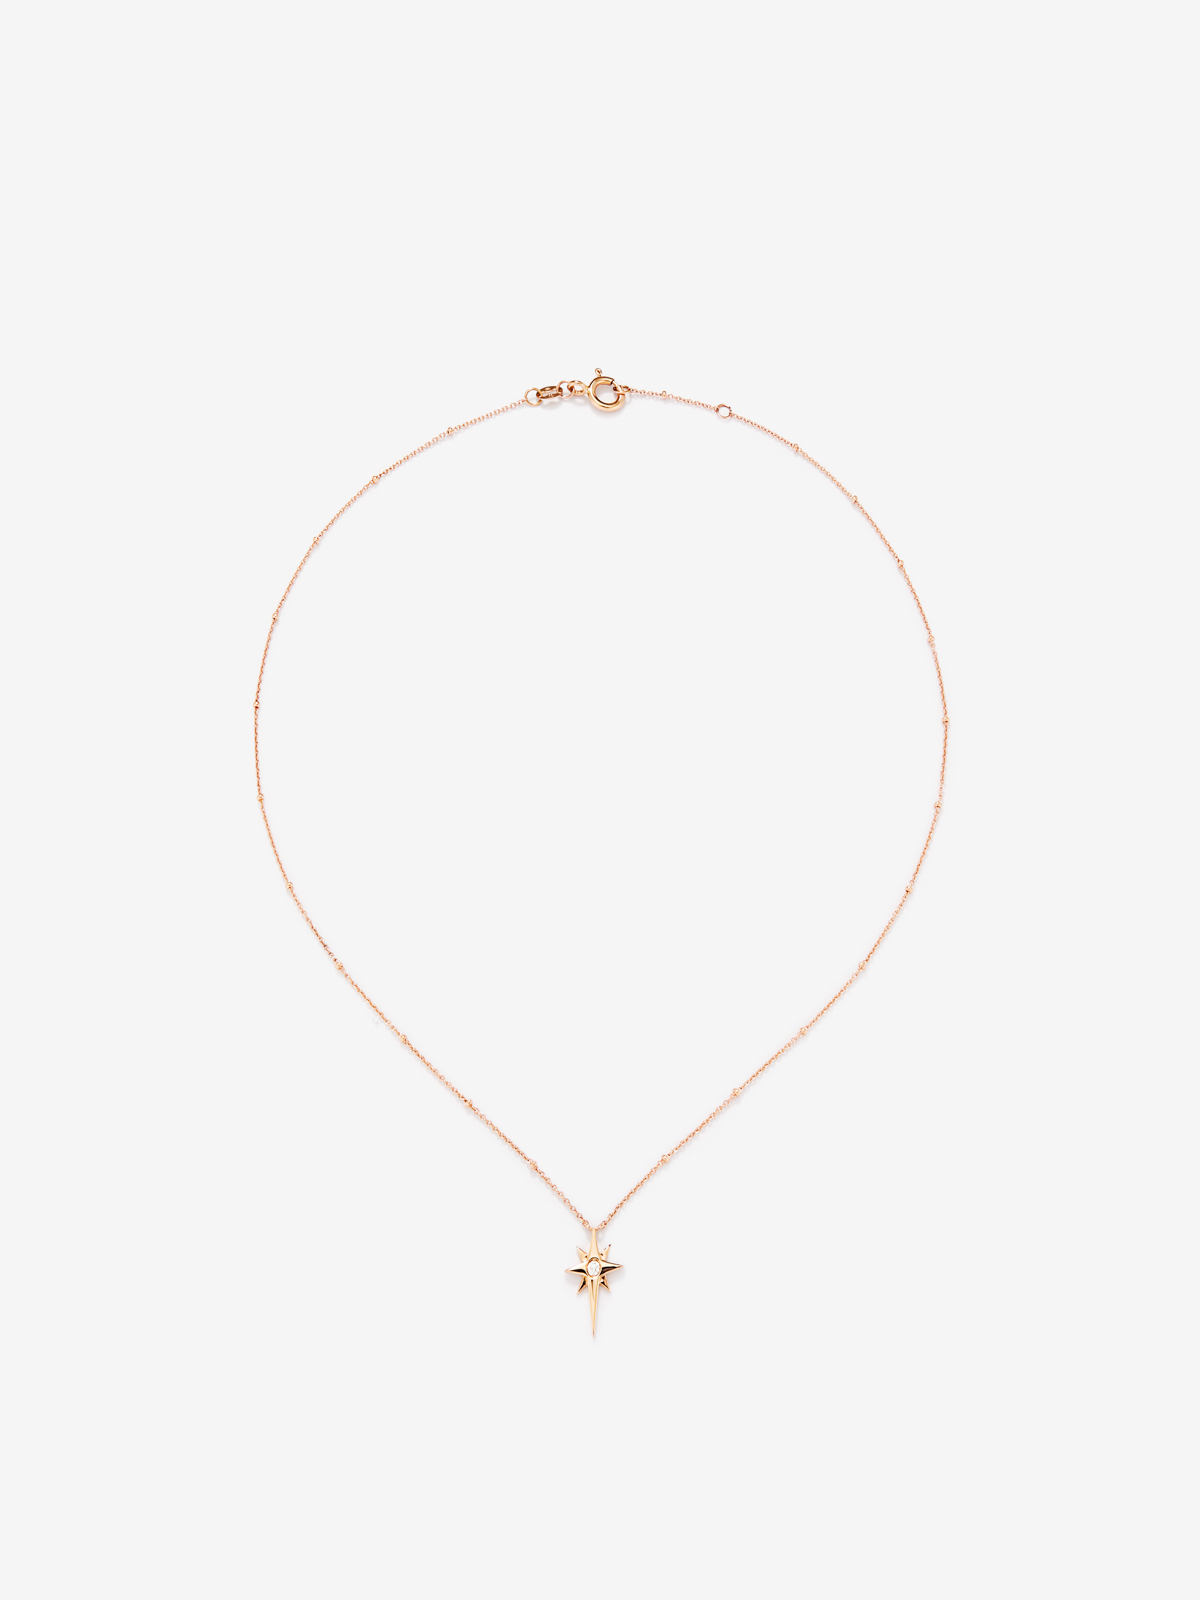 Pendant chain with 18K rose gold star with diamond.